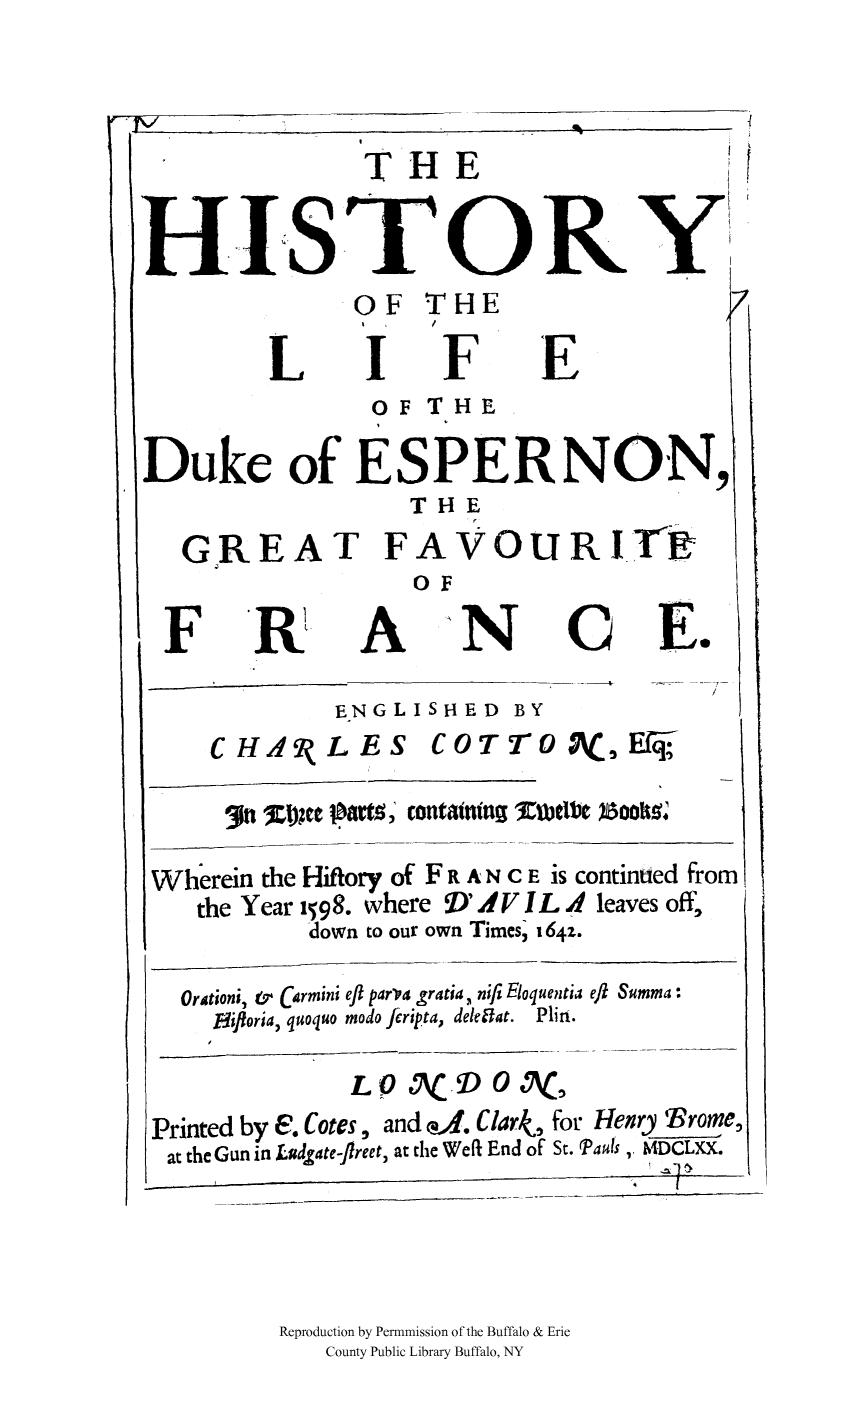 handle is hein.cow/dukespff0001 and id is 1 raw text is: THE                            ft
HISTORY
OF THE
I     /
LIFE
O F THE
Duke of ESPERNON,
THE
G REAT FAVOURITE
OF
FR A N CE.
ENGLISHED BY
CH14 9LES CO TTo              , Ef
arte st; contatnnt %UIelbel 4oo9
Wherein the Hiftory of F R A N C E is continued from
the Year 1598. where  D'IV IL A leaves off,
down to our own Times; t64z.
Orationi, &r Carmini eft parva gratia, nifi Eloquentia eft Summa:
Eiforia, quoquo modo ftripta, deleffat. Plin.
L 0 AC, D 0 A(
Printed by E. Cotes, and a. Clark, for Henry Vrorne,
at the Gun in Ludgate-flreet, at the Weft End of St. Pauls, MLii.
Reproduction by Permnmission of the Buffalo & Erie
County Public Library Buffalo, NY


